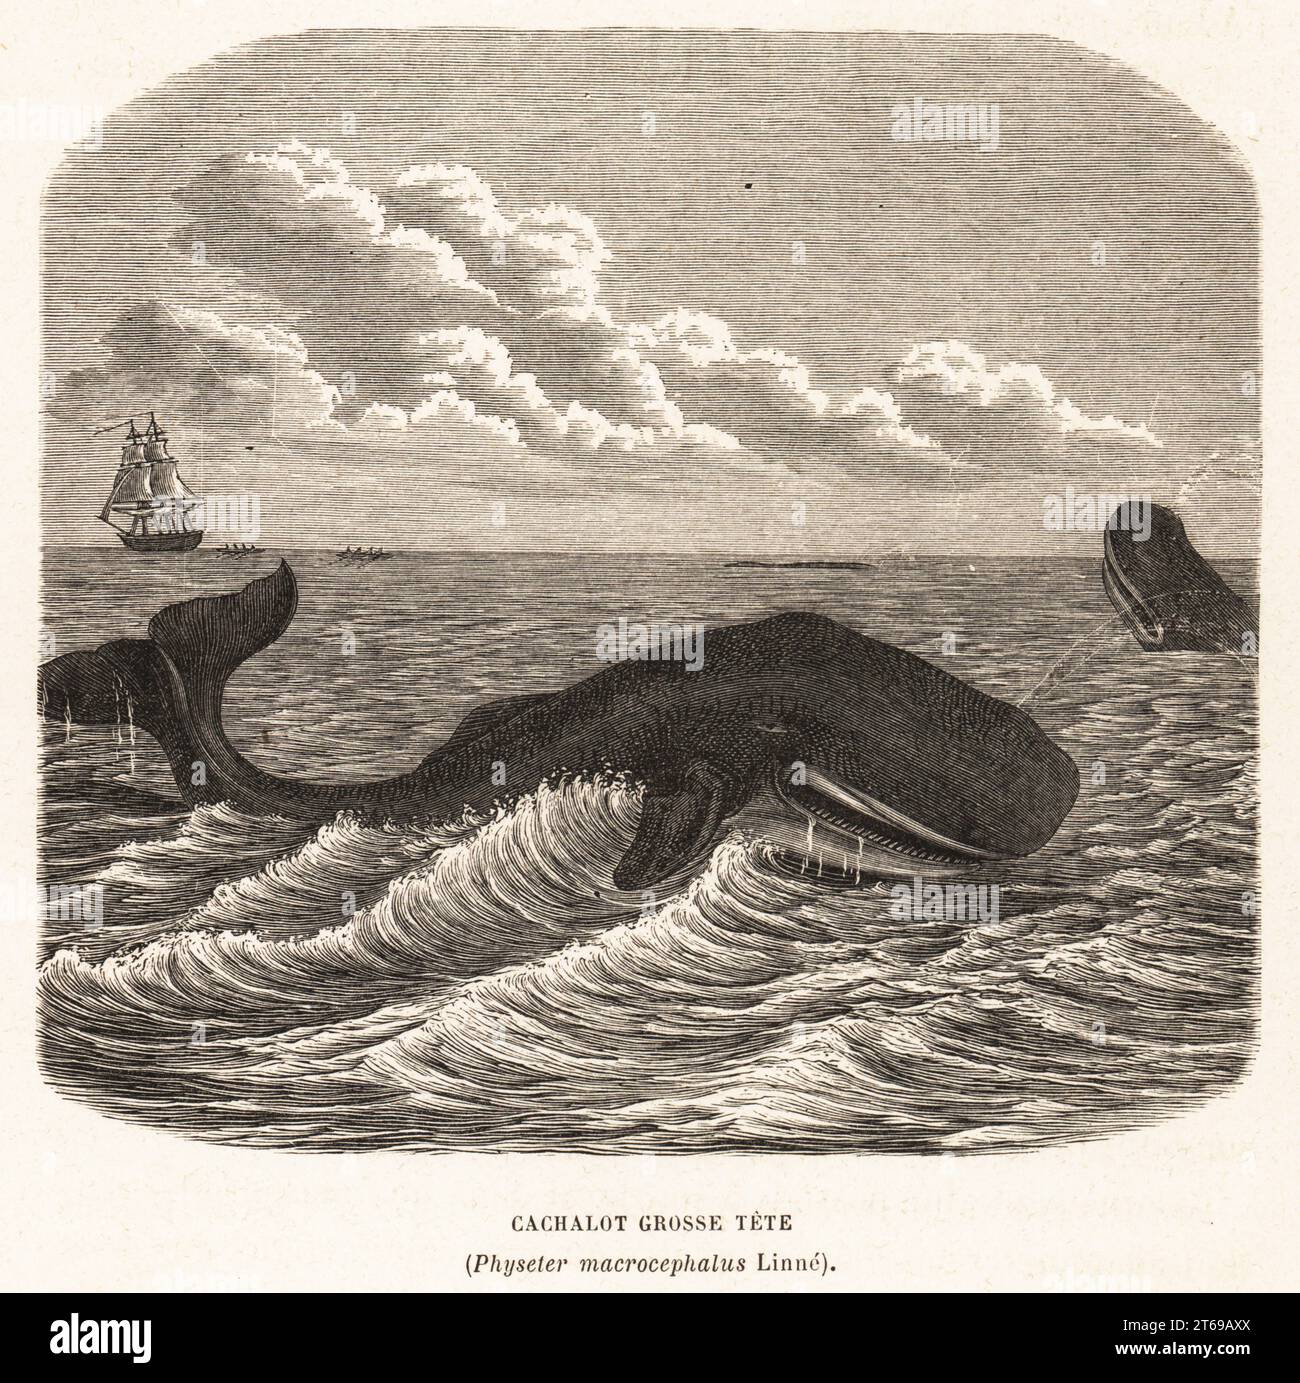 Sperm whale or cachalot, Physeter macrocephalus. A whaler hunting in the distance. Cachalot grosse tete. Woodcut from Alfred Fredols Le Monde de la Mer, the World of the Sea, edited by Olivier Fredol, Librairie Hachette et. Cie., Paris, 1881. Alfred Fredol was the pseudonym of French zoologist and botanist Alfred Moquin-Tandon, 1804-1863. Stock Photo